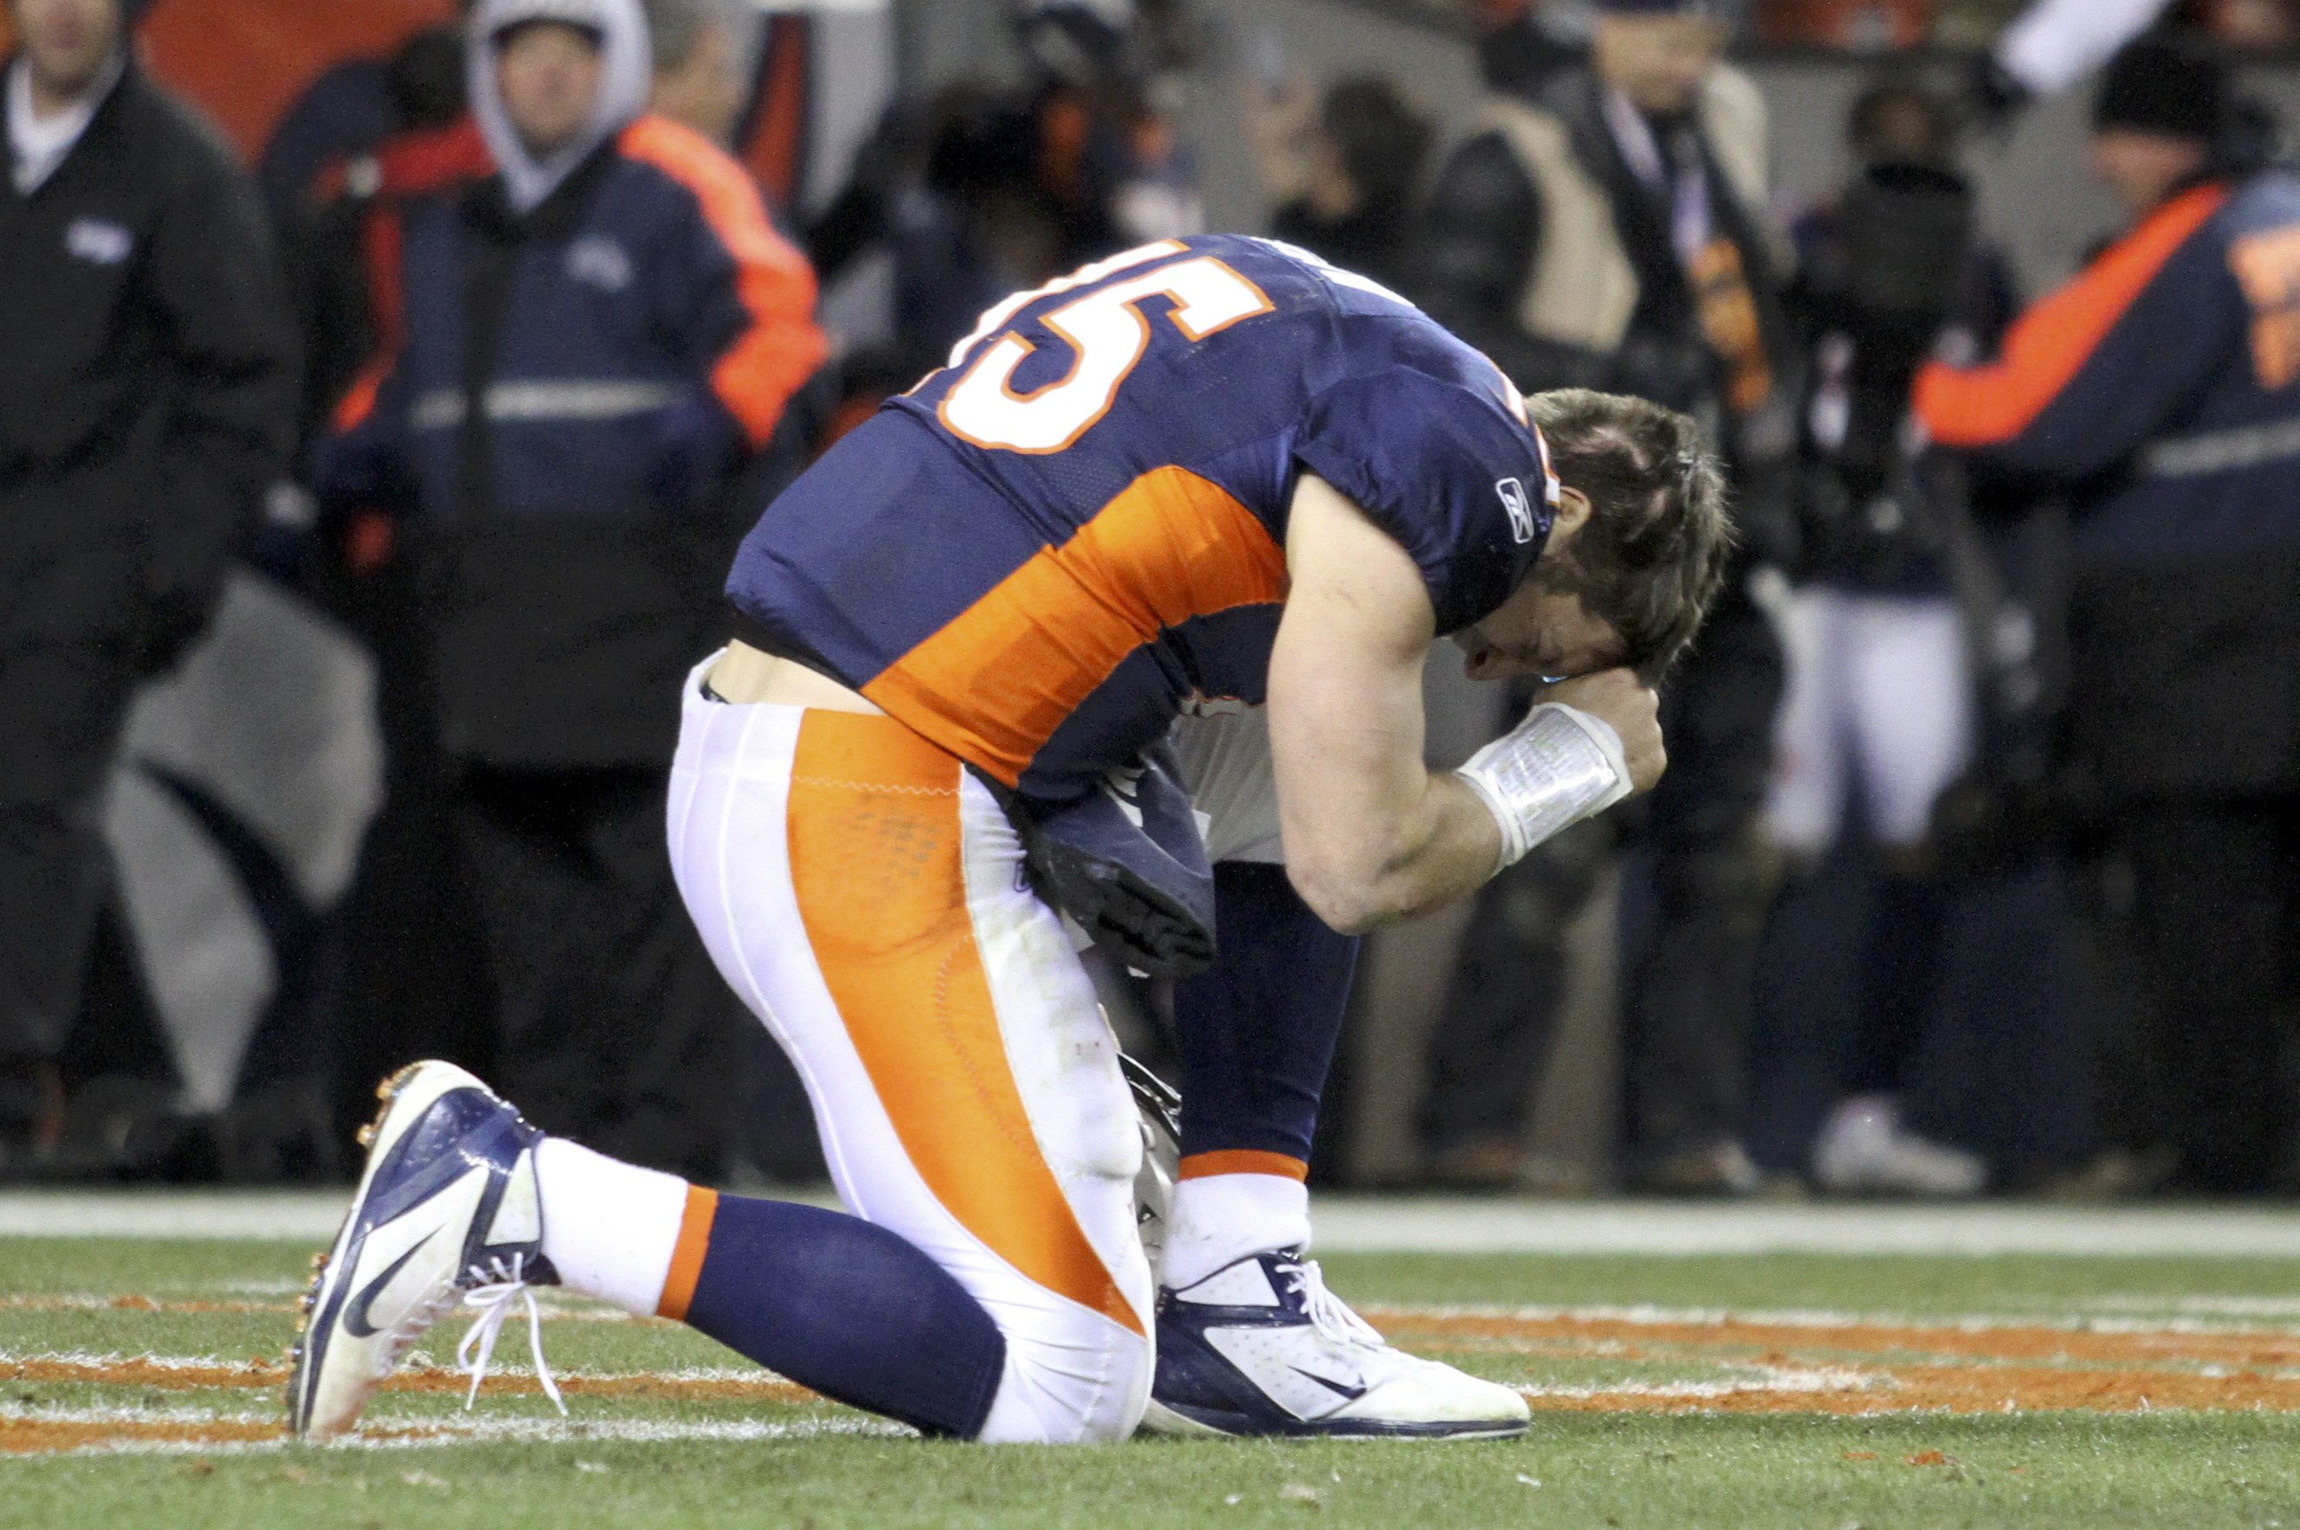 Denver Broncos quarterback Tim Tebow prays after the Broncos defeated the Pittsburgh Steelers in overtime in the National Football League AFC wild-card playoff game in Denver Jan. 8. The Broncos won 29-23, leading them to a face-off with the New England Patriots Jan. 14. (CNS photo/Marc Piscotty, Reuters)